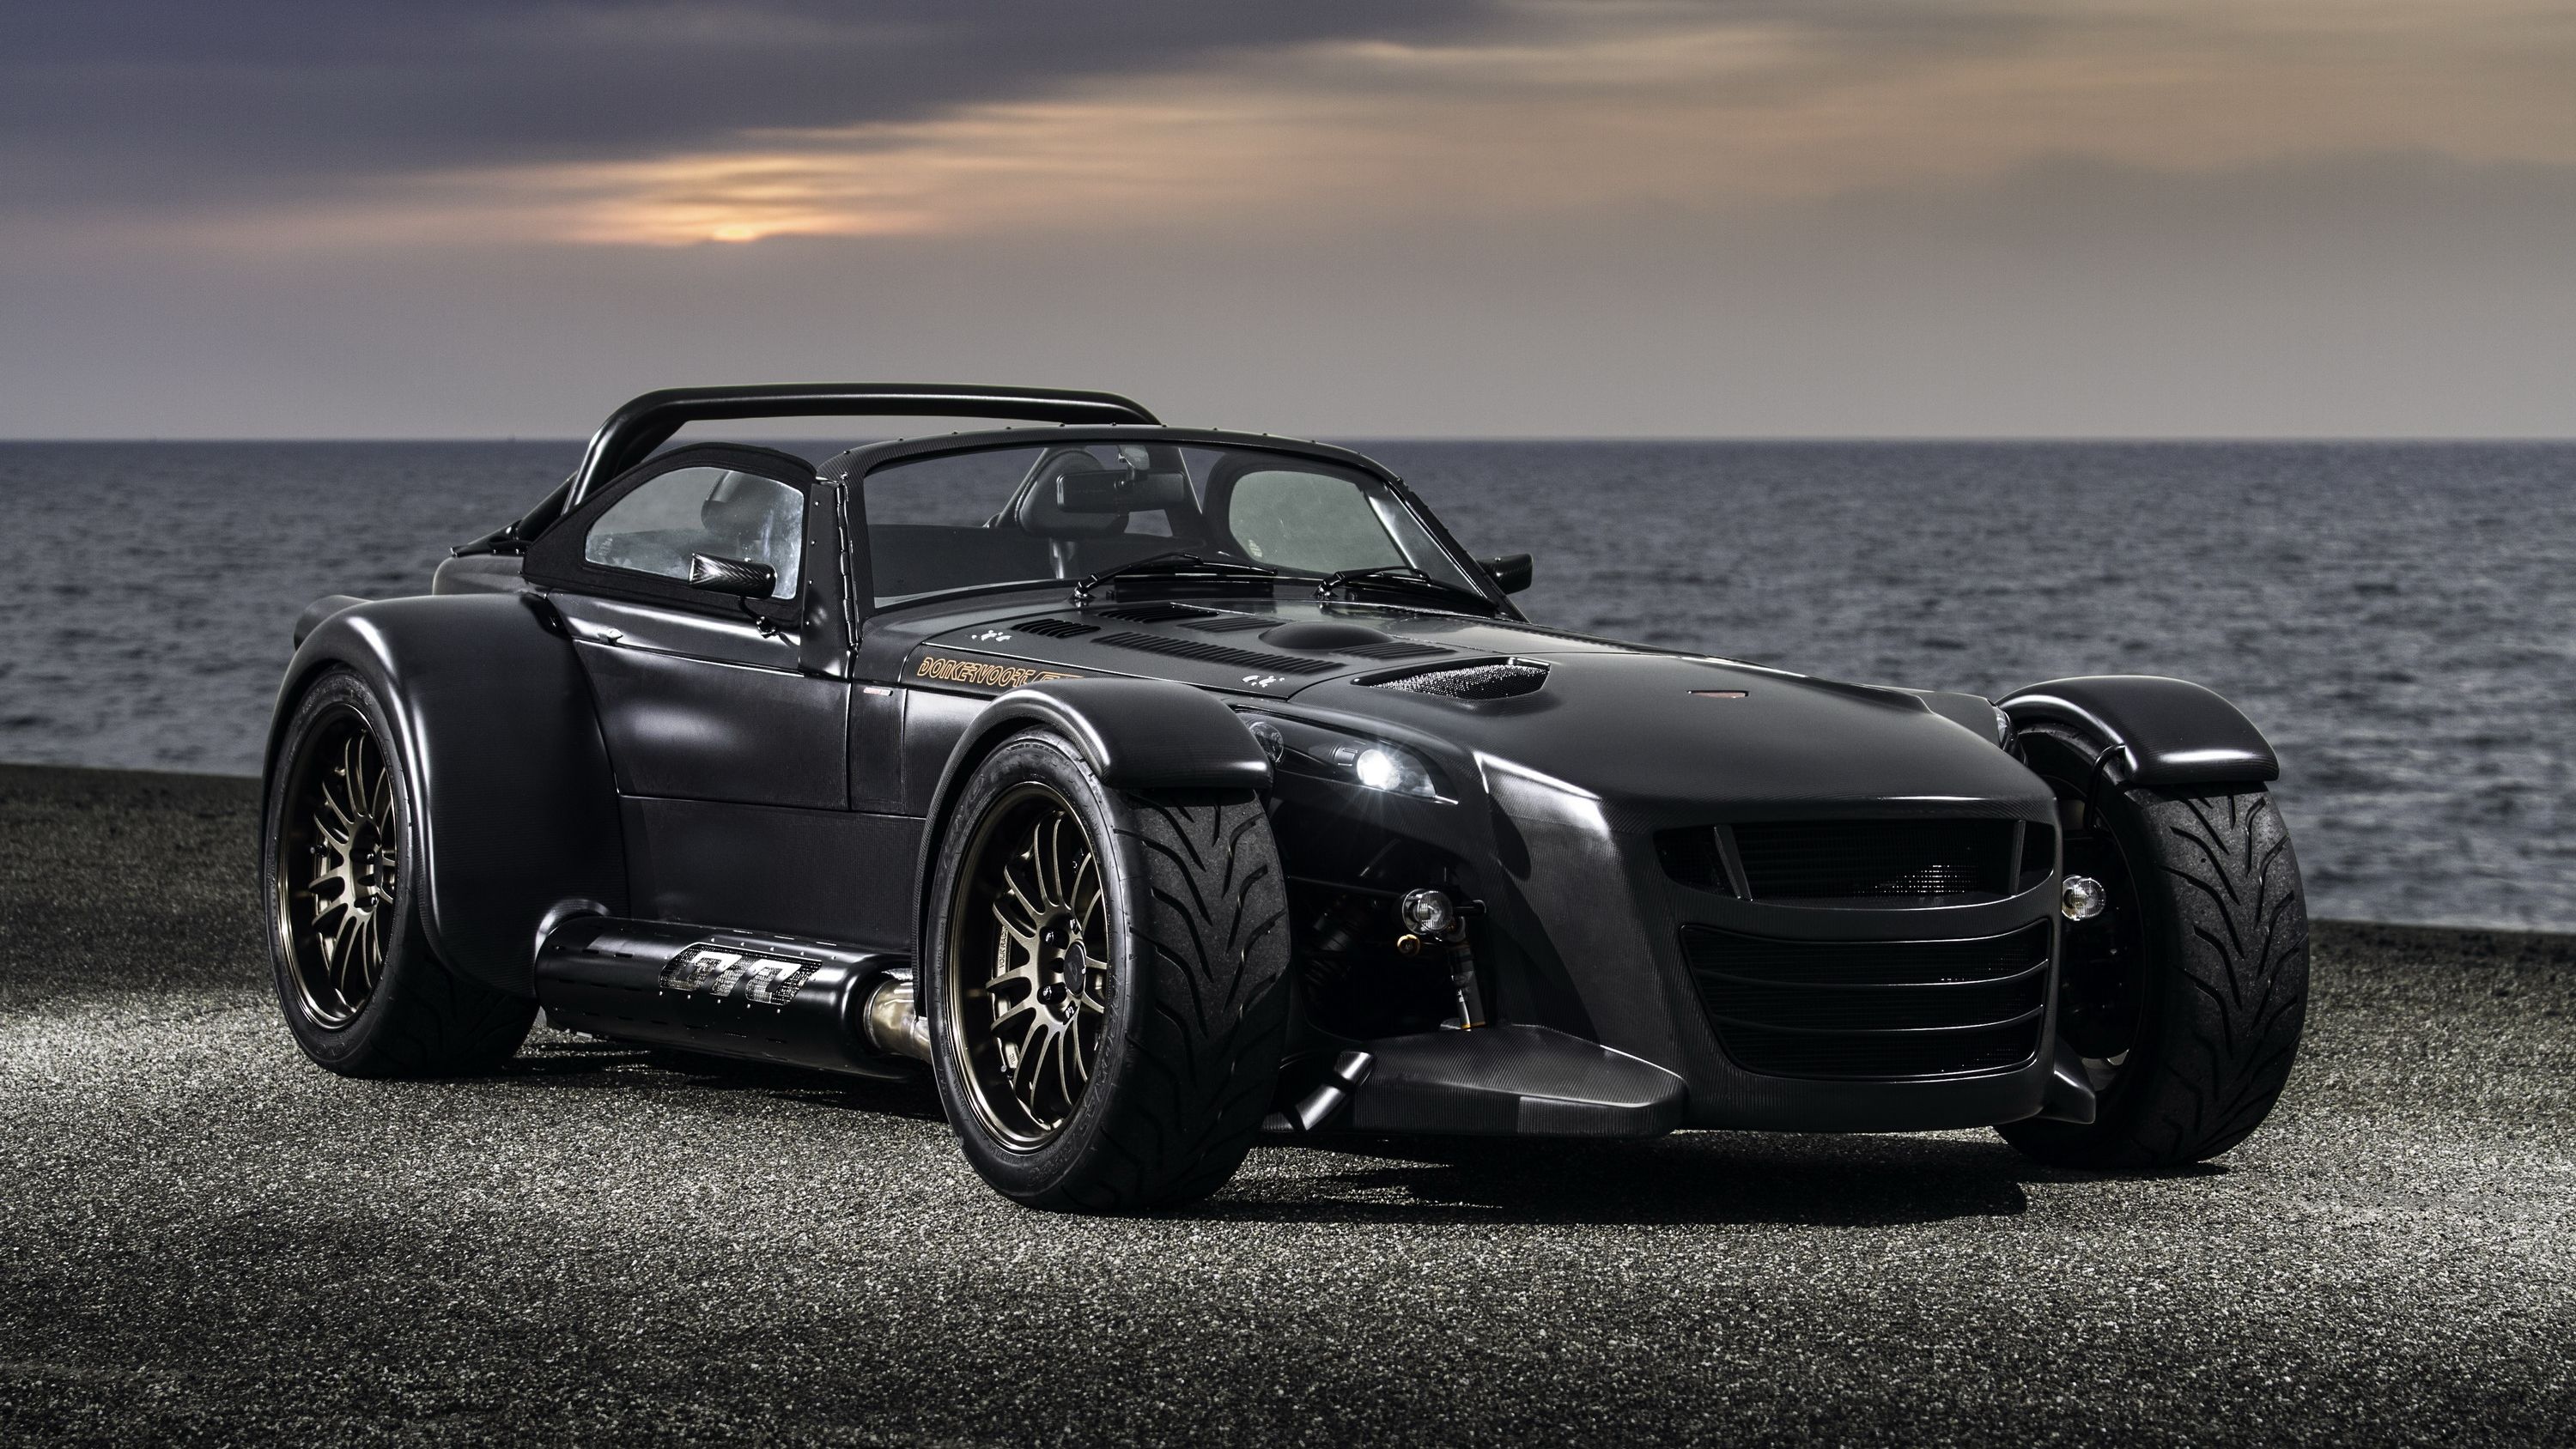 2015 Donkervoort D8 GTO Bare Naked Carbon Edition